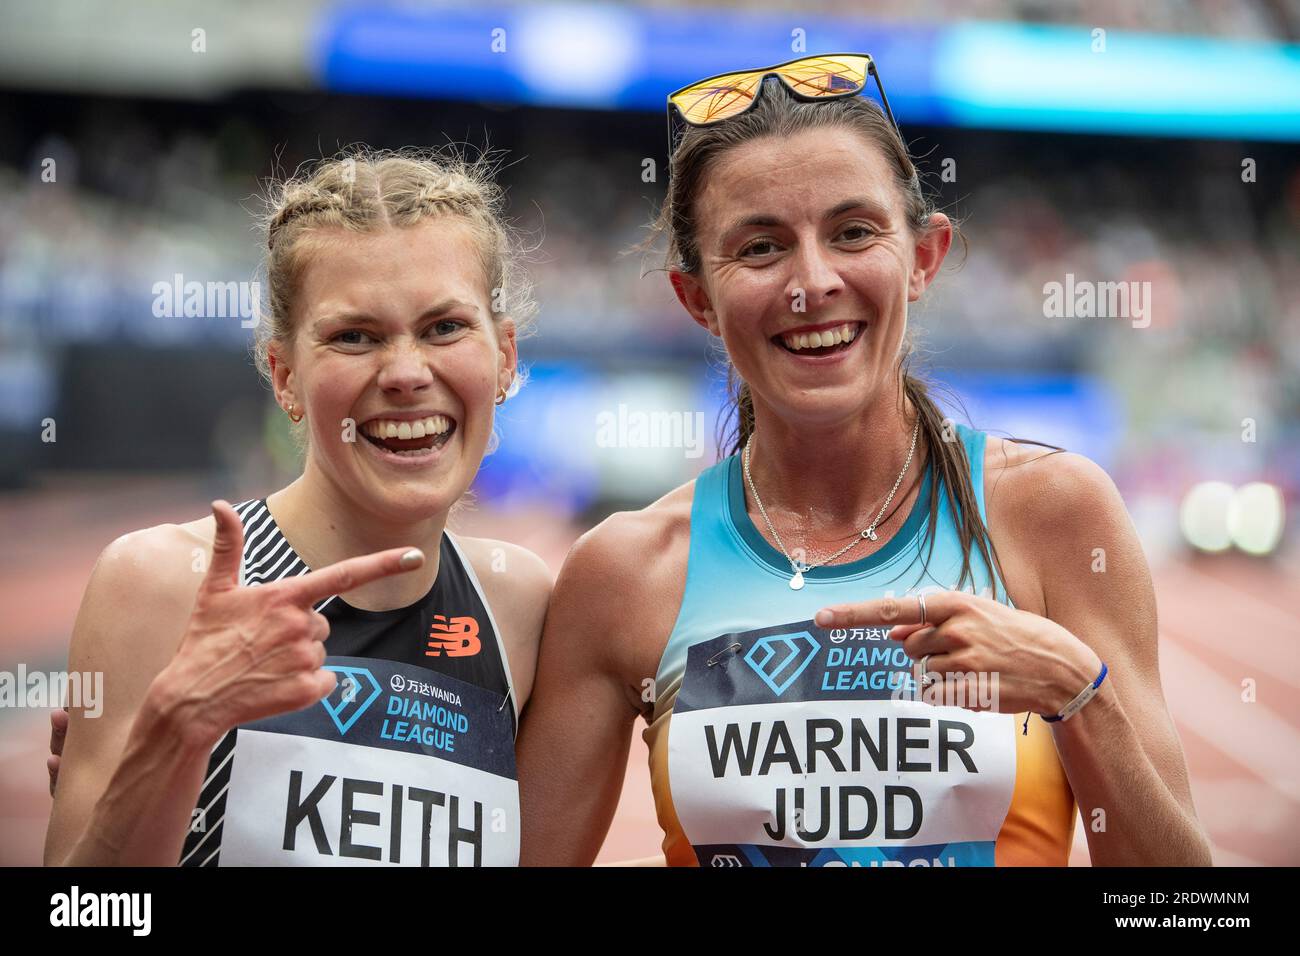 London, UK. 23rd July, 2023. Megan Keith and Jessica Warner-Judd of Great Britain & NI having a bit of fun after competiing in the women's 5000m at the Wanda Diamond League London Event, London Stadium on the 23rd July 2023. Photo by Gary Mitchell/Alamy Live News Stock Photo